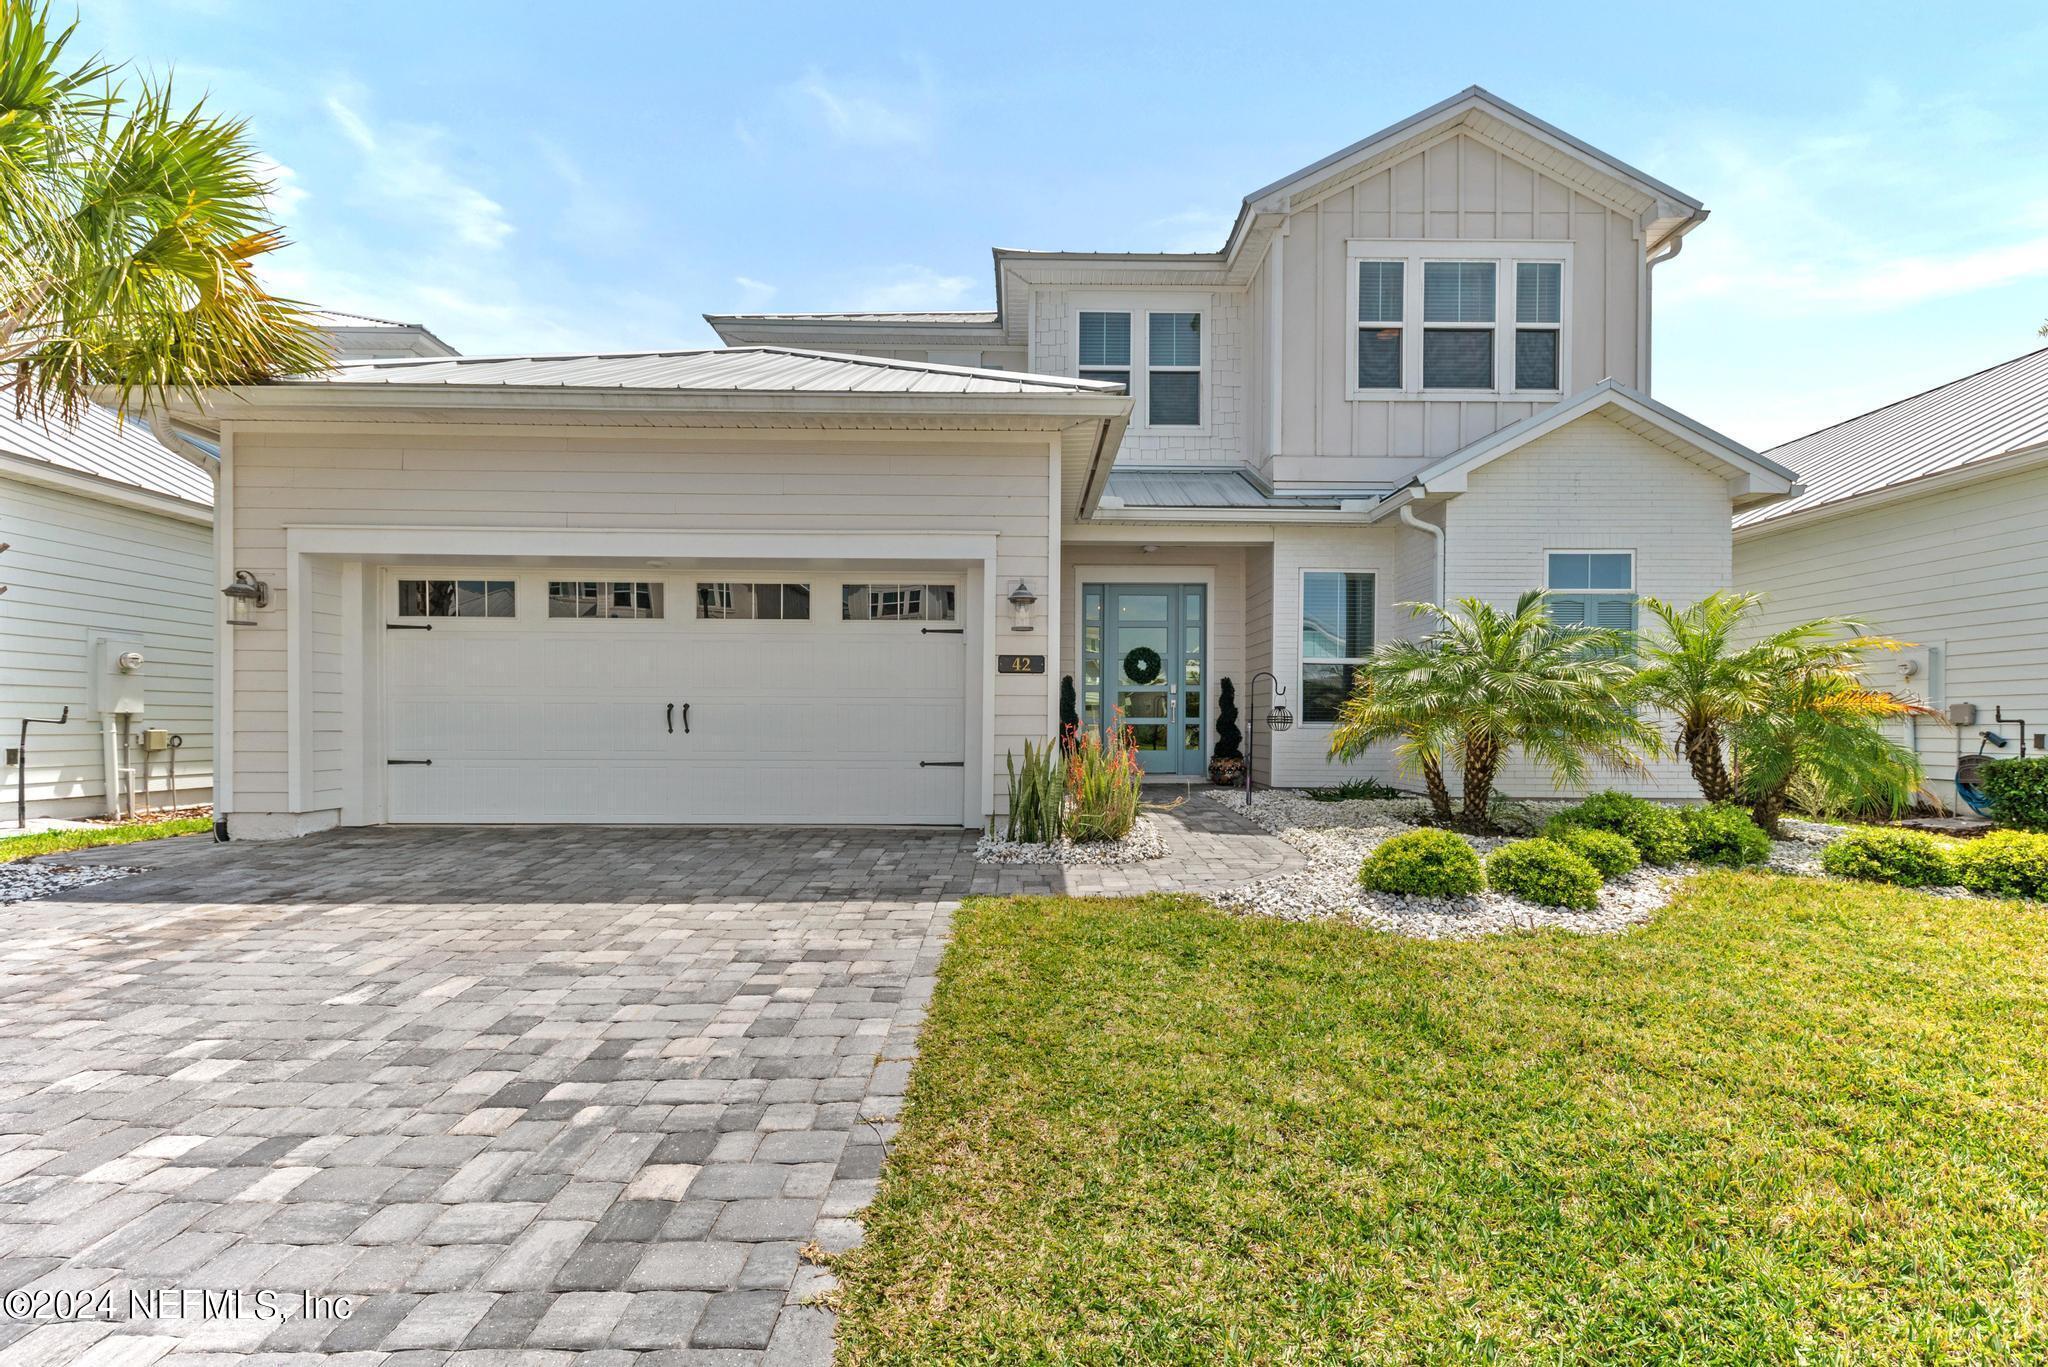 St Johns, FL home for sale located at 42 Waterline Drive, St Johns, FL 32259